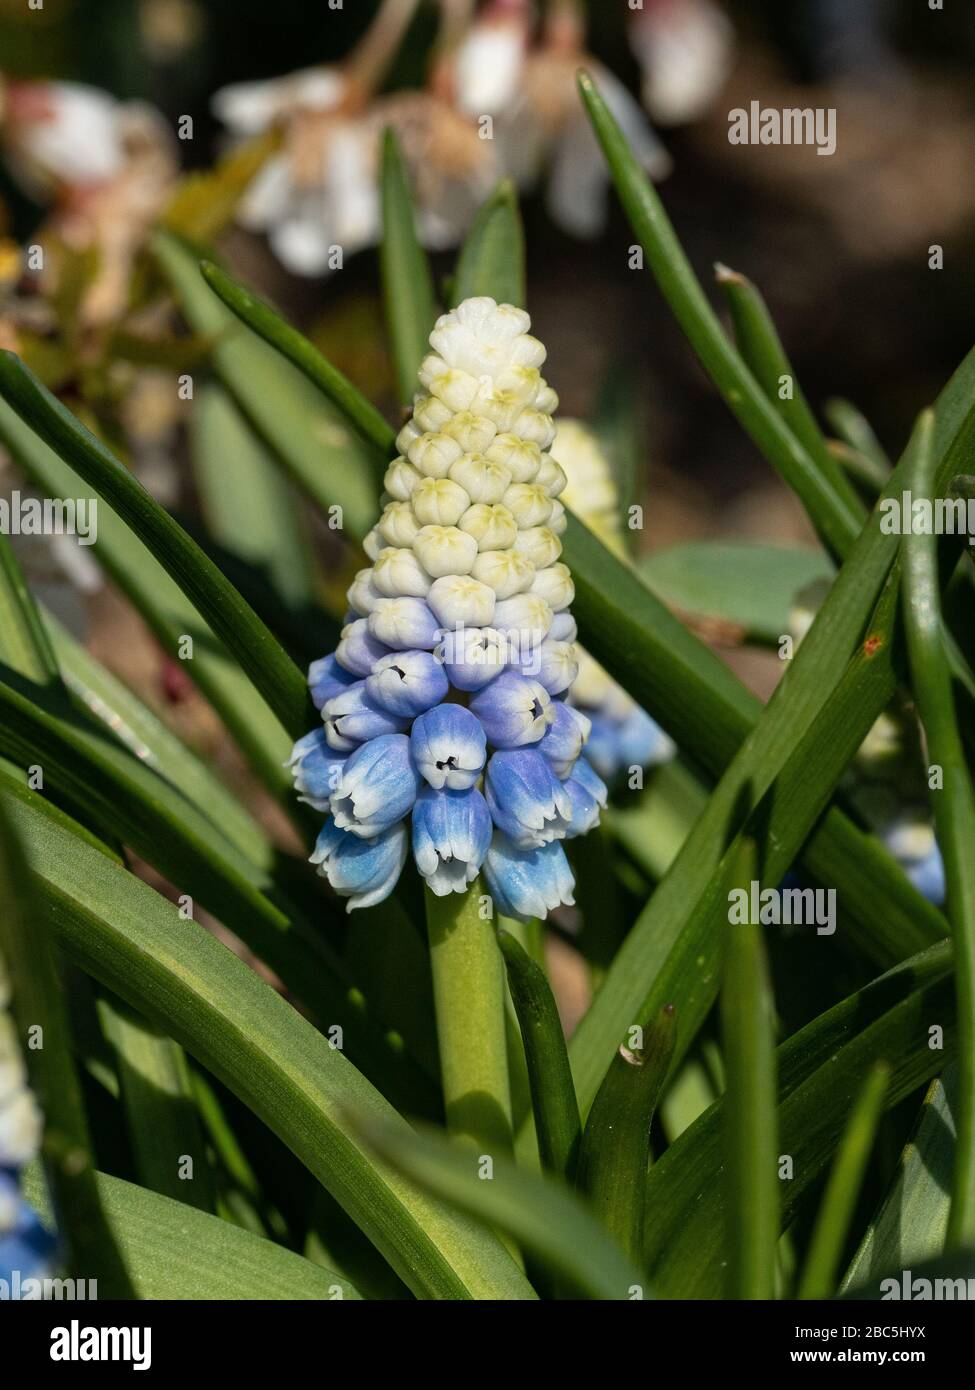 A close up of a white fading to blue flower spike of the grape hyacinth Muscari armeniacum 'Mountain Lady' Stock Photo